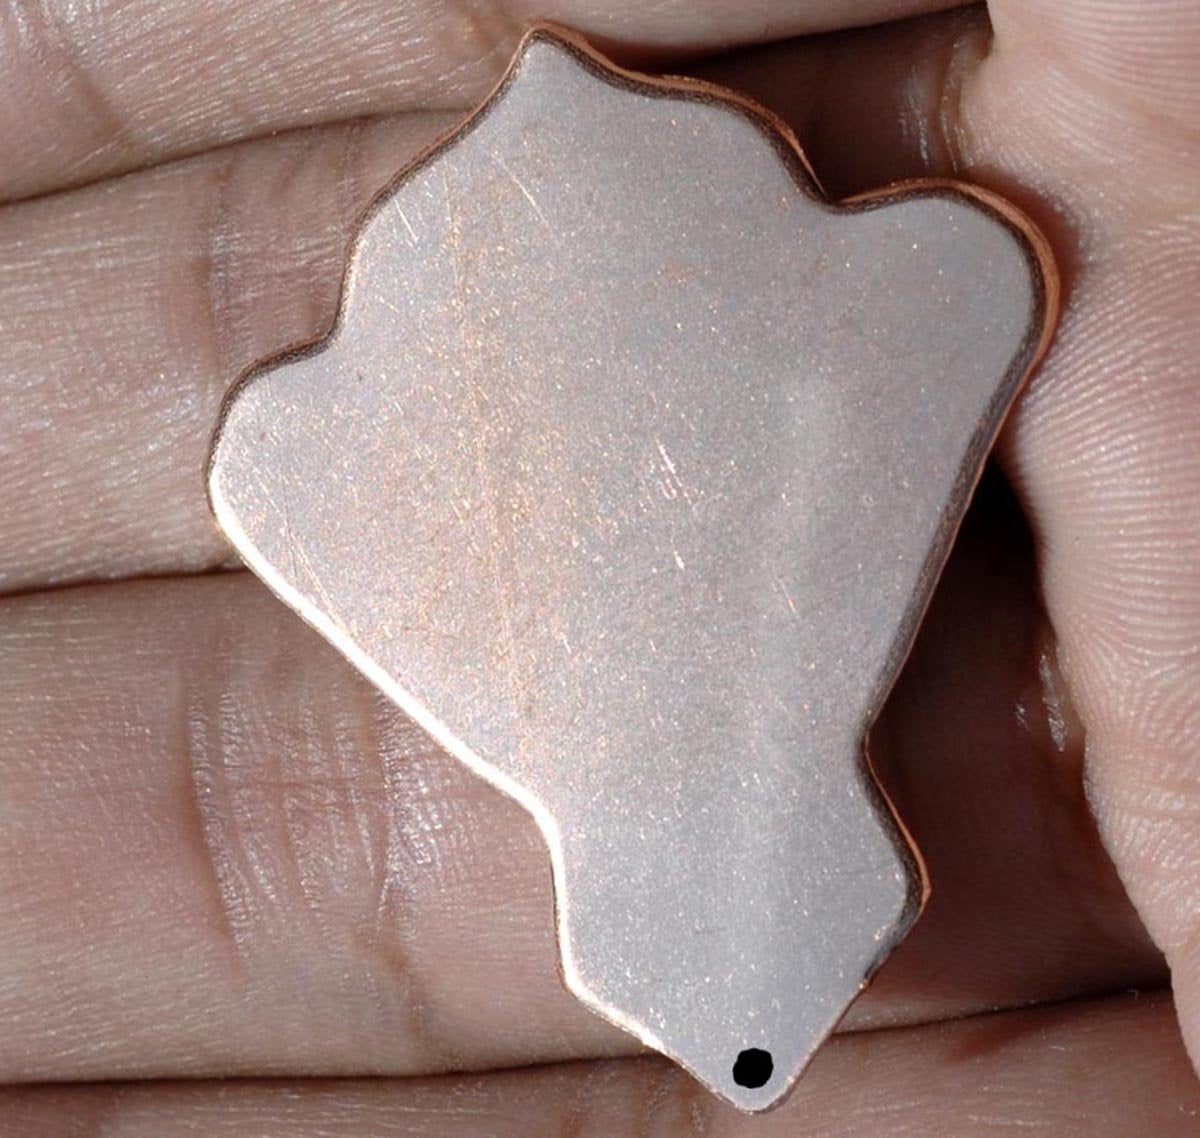 Copper 20g Morrocan Drop Shape Blank Cutout for Enameling Stamping Texturing Variety of Metals 4 Pieces